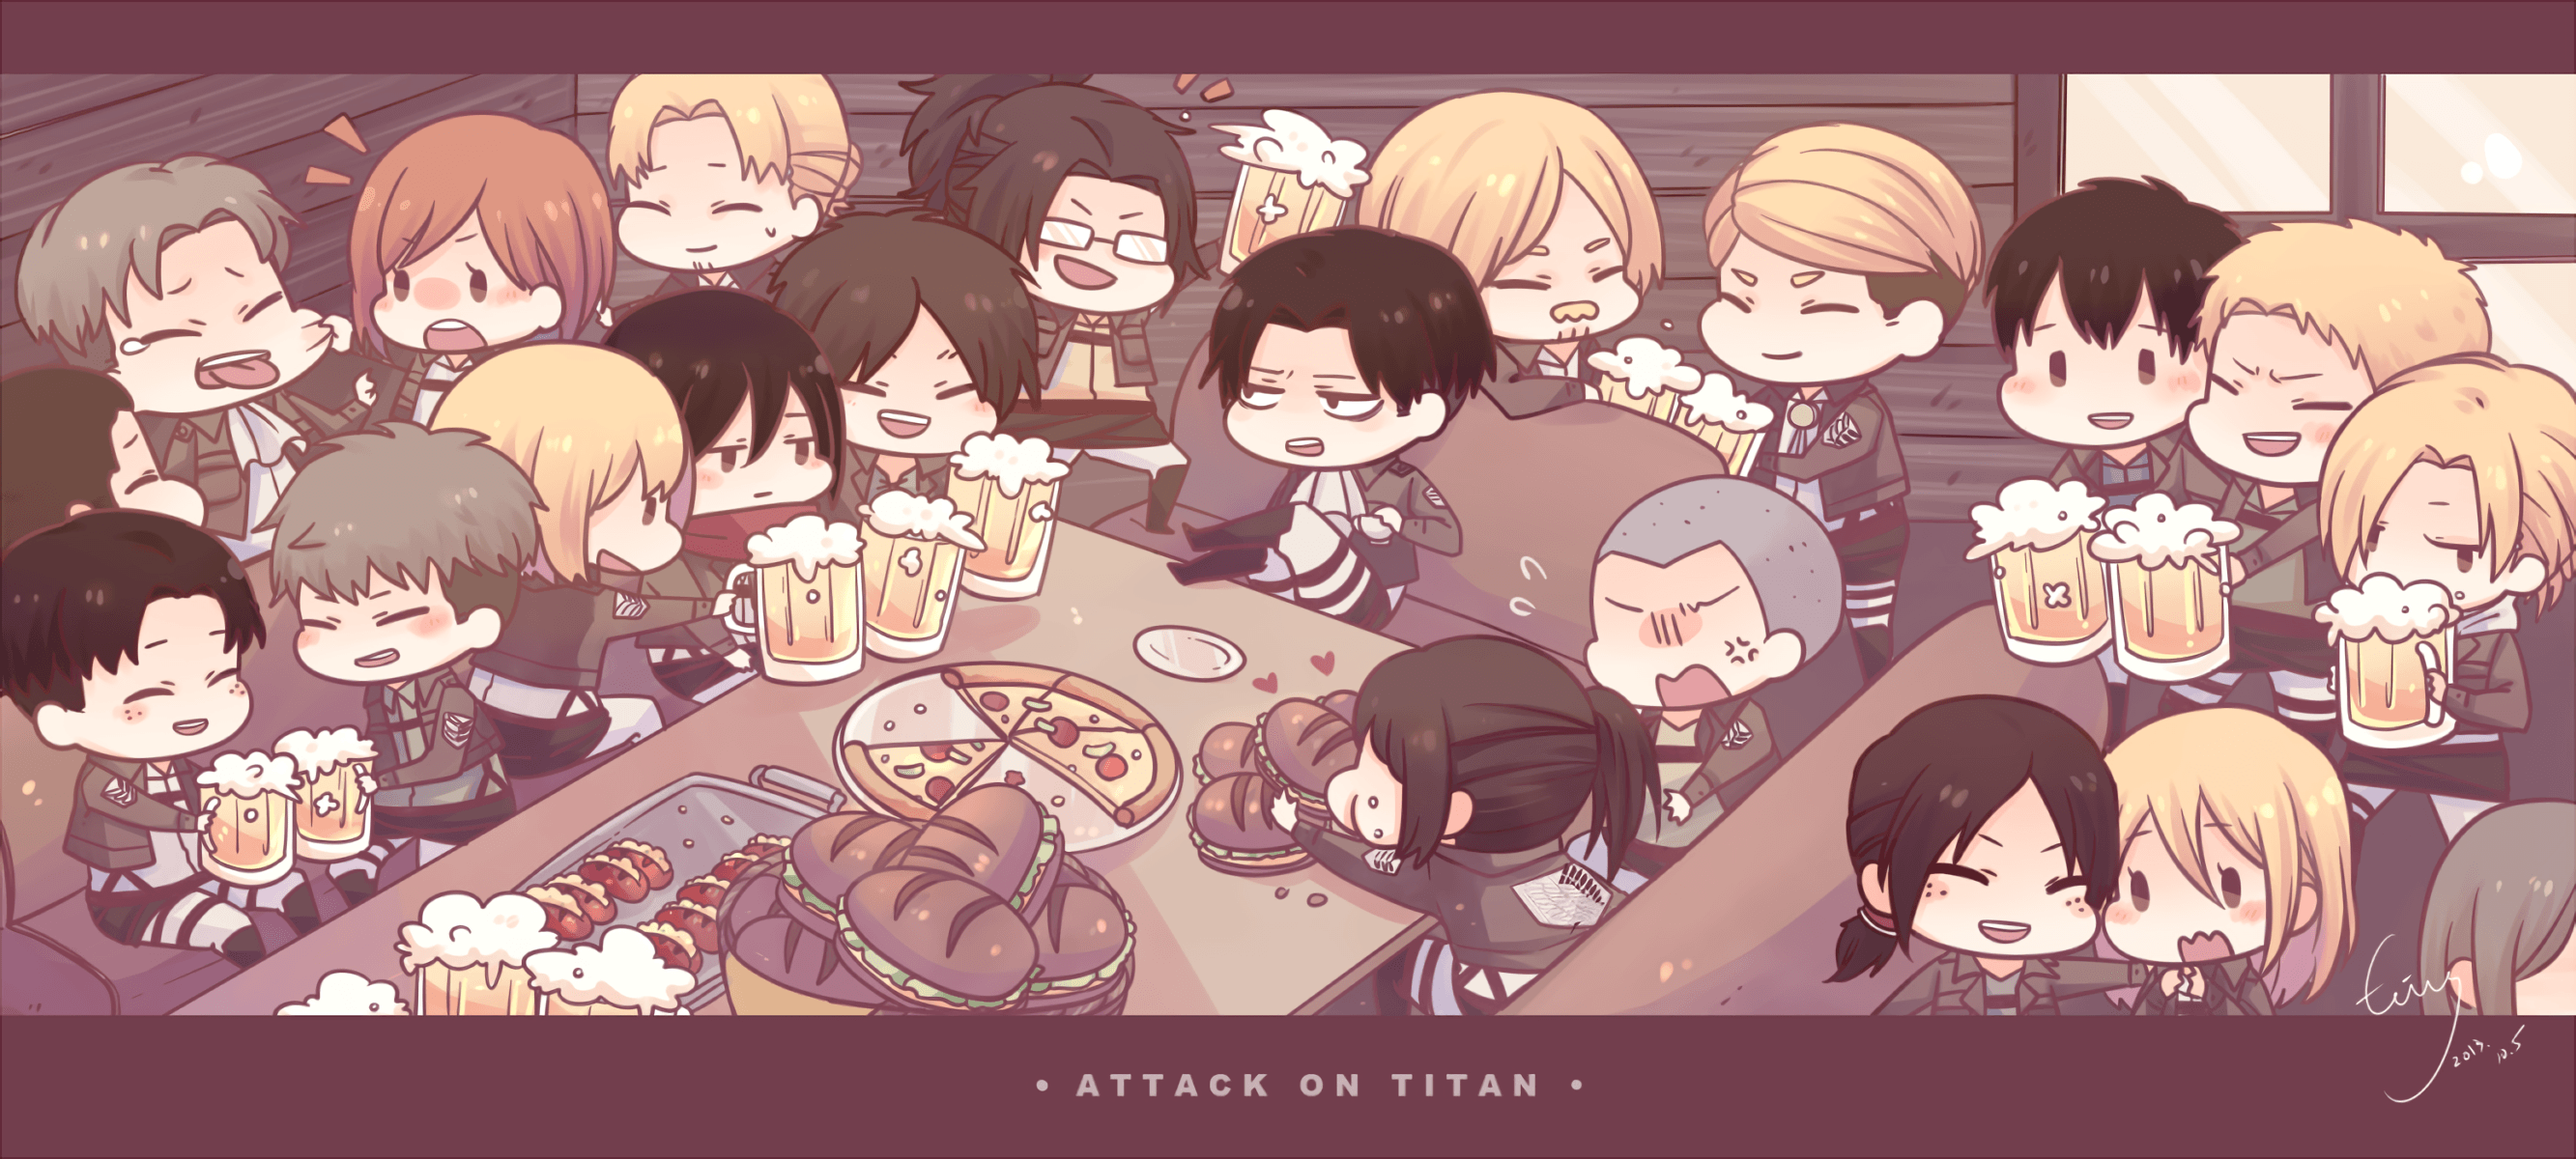 Attack on Titan squad party! Full HD Wallpapers and Backgrounds Image